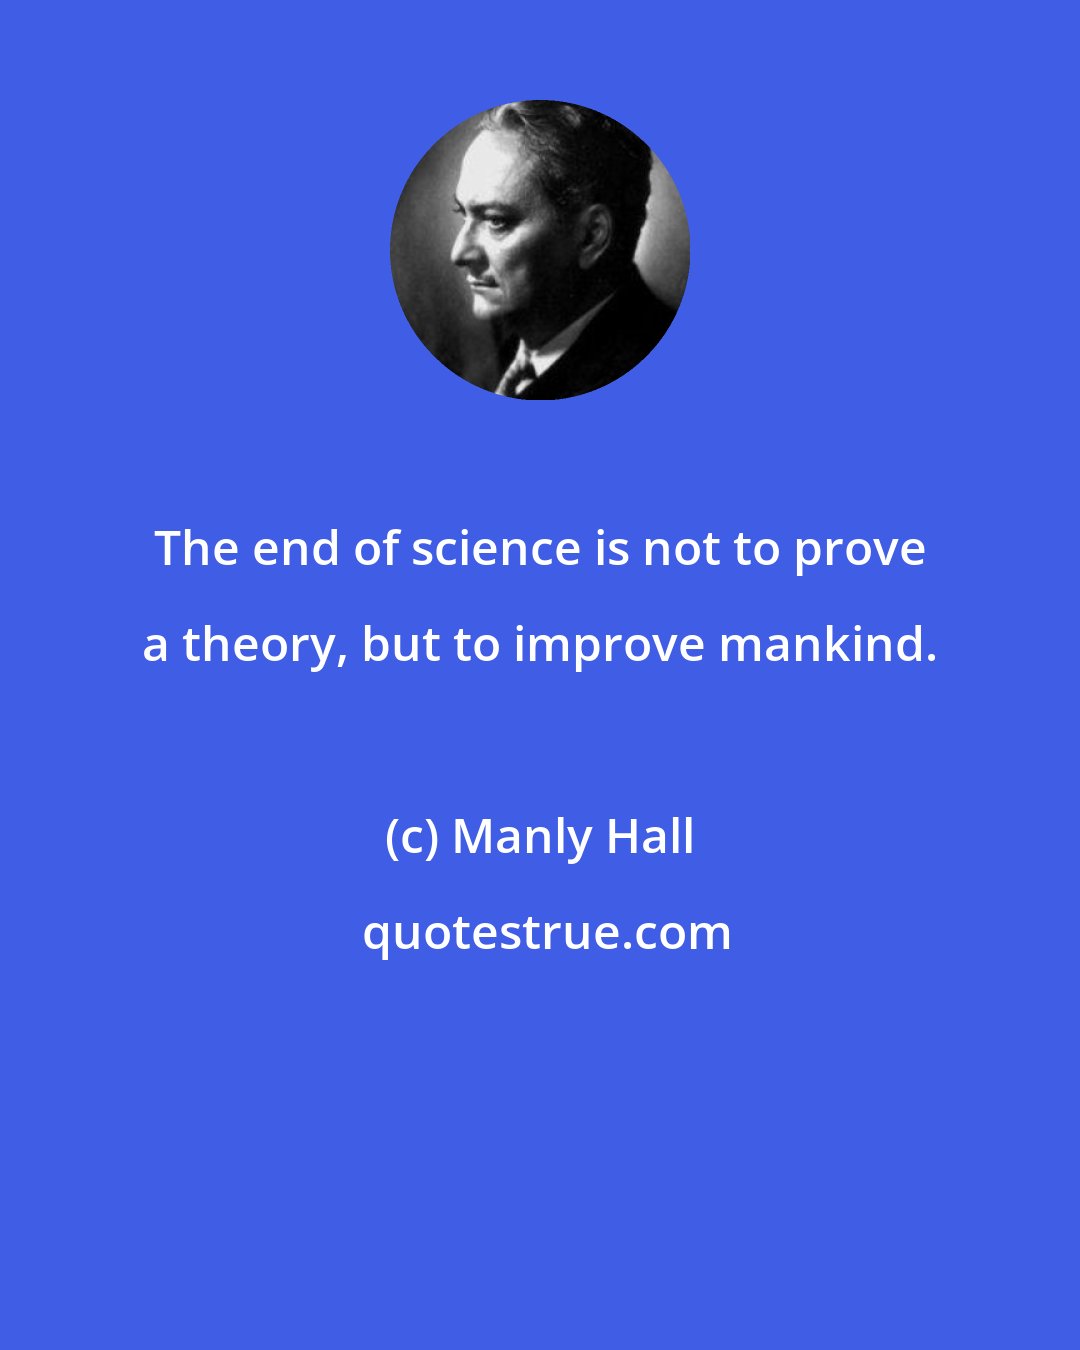 Manly Hall: The end of science is not to prove a theory, but to improve mankind.